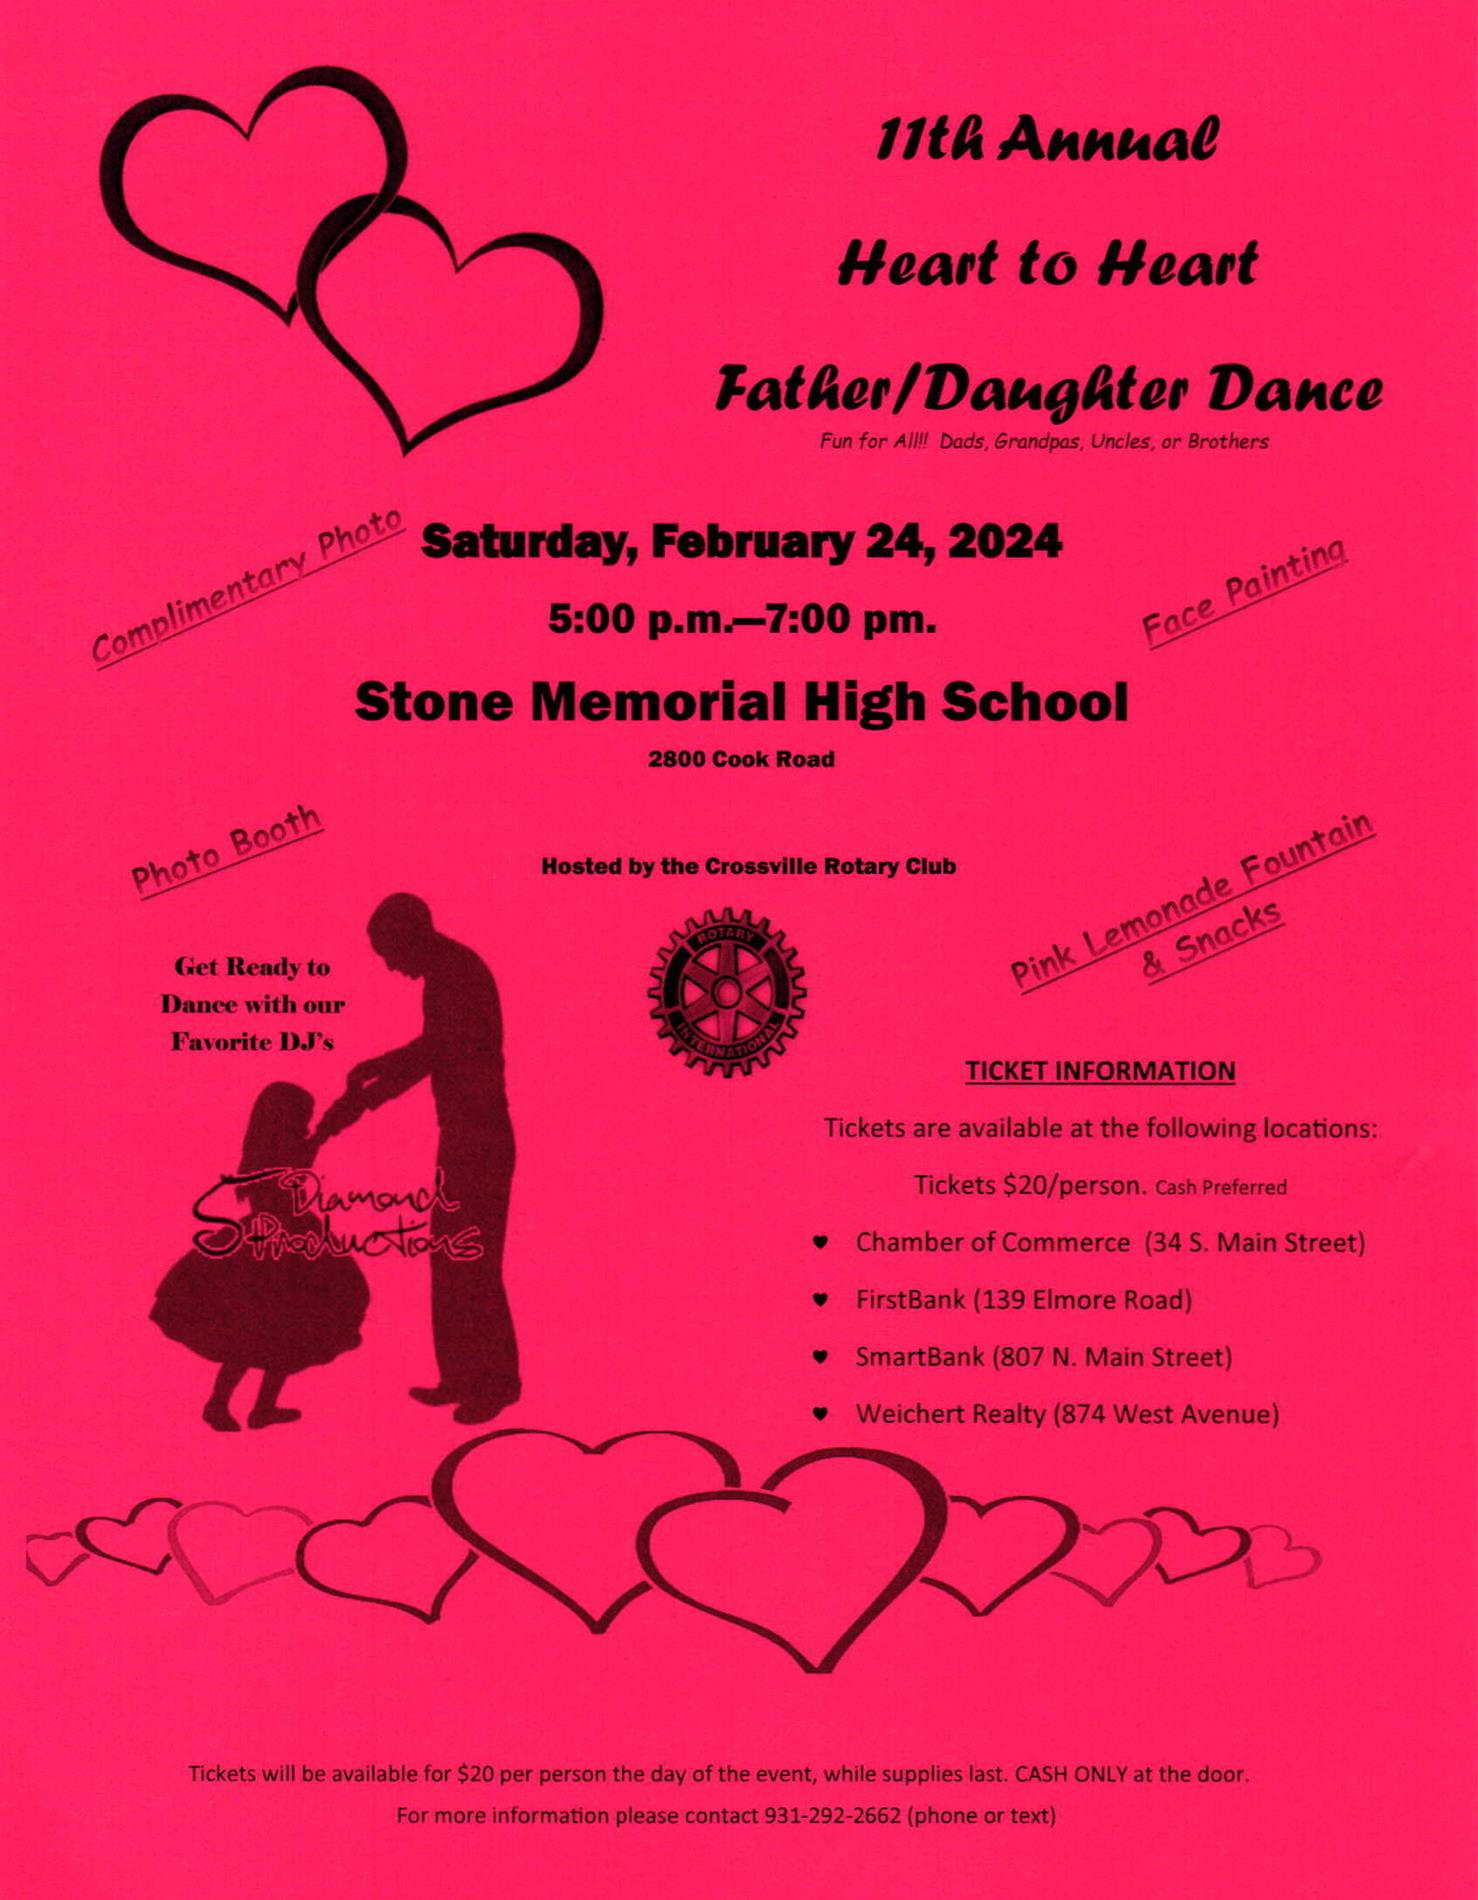 11th Annual Heart to Heart Father/DaughterDance